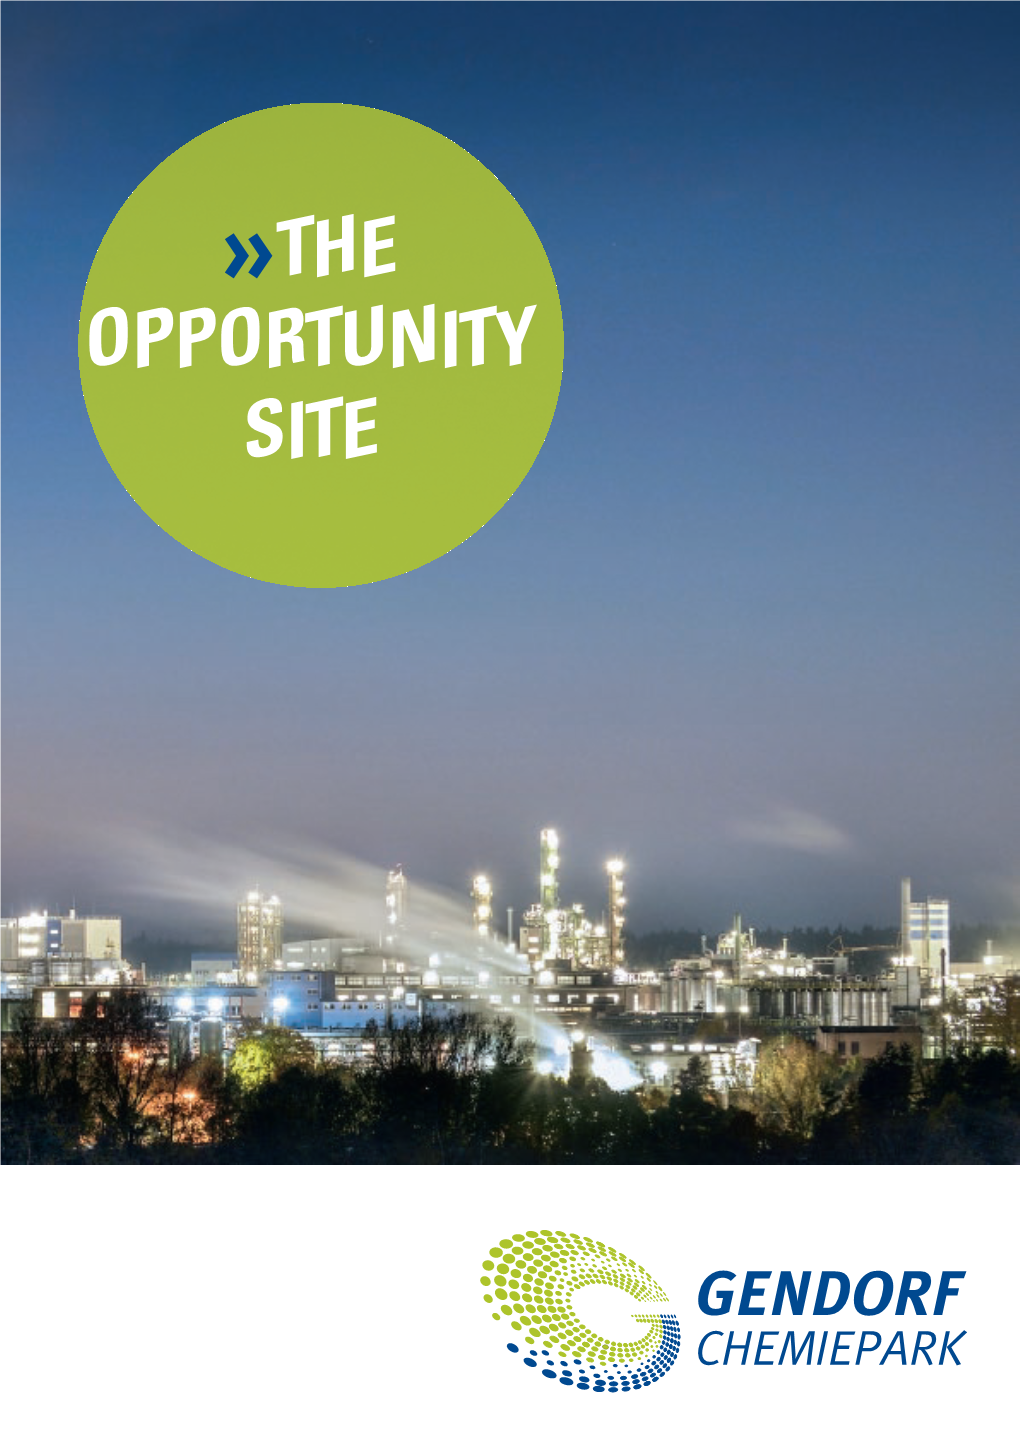 THE OPPORTUNITY SITE WELCOME to the GENDORF CONTENT CHEMICAL PARK Information About the Site